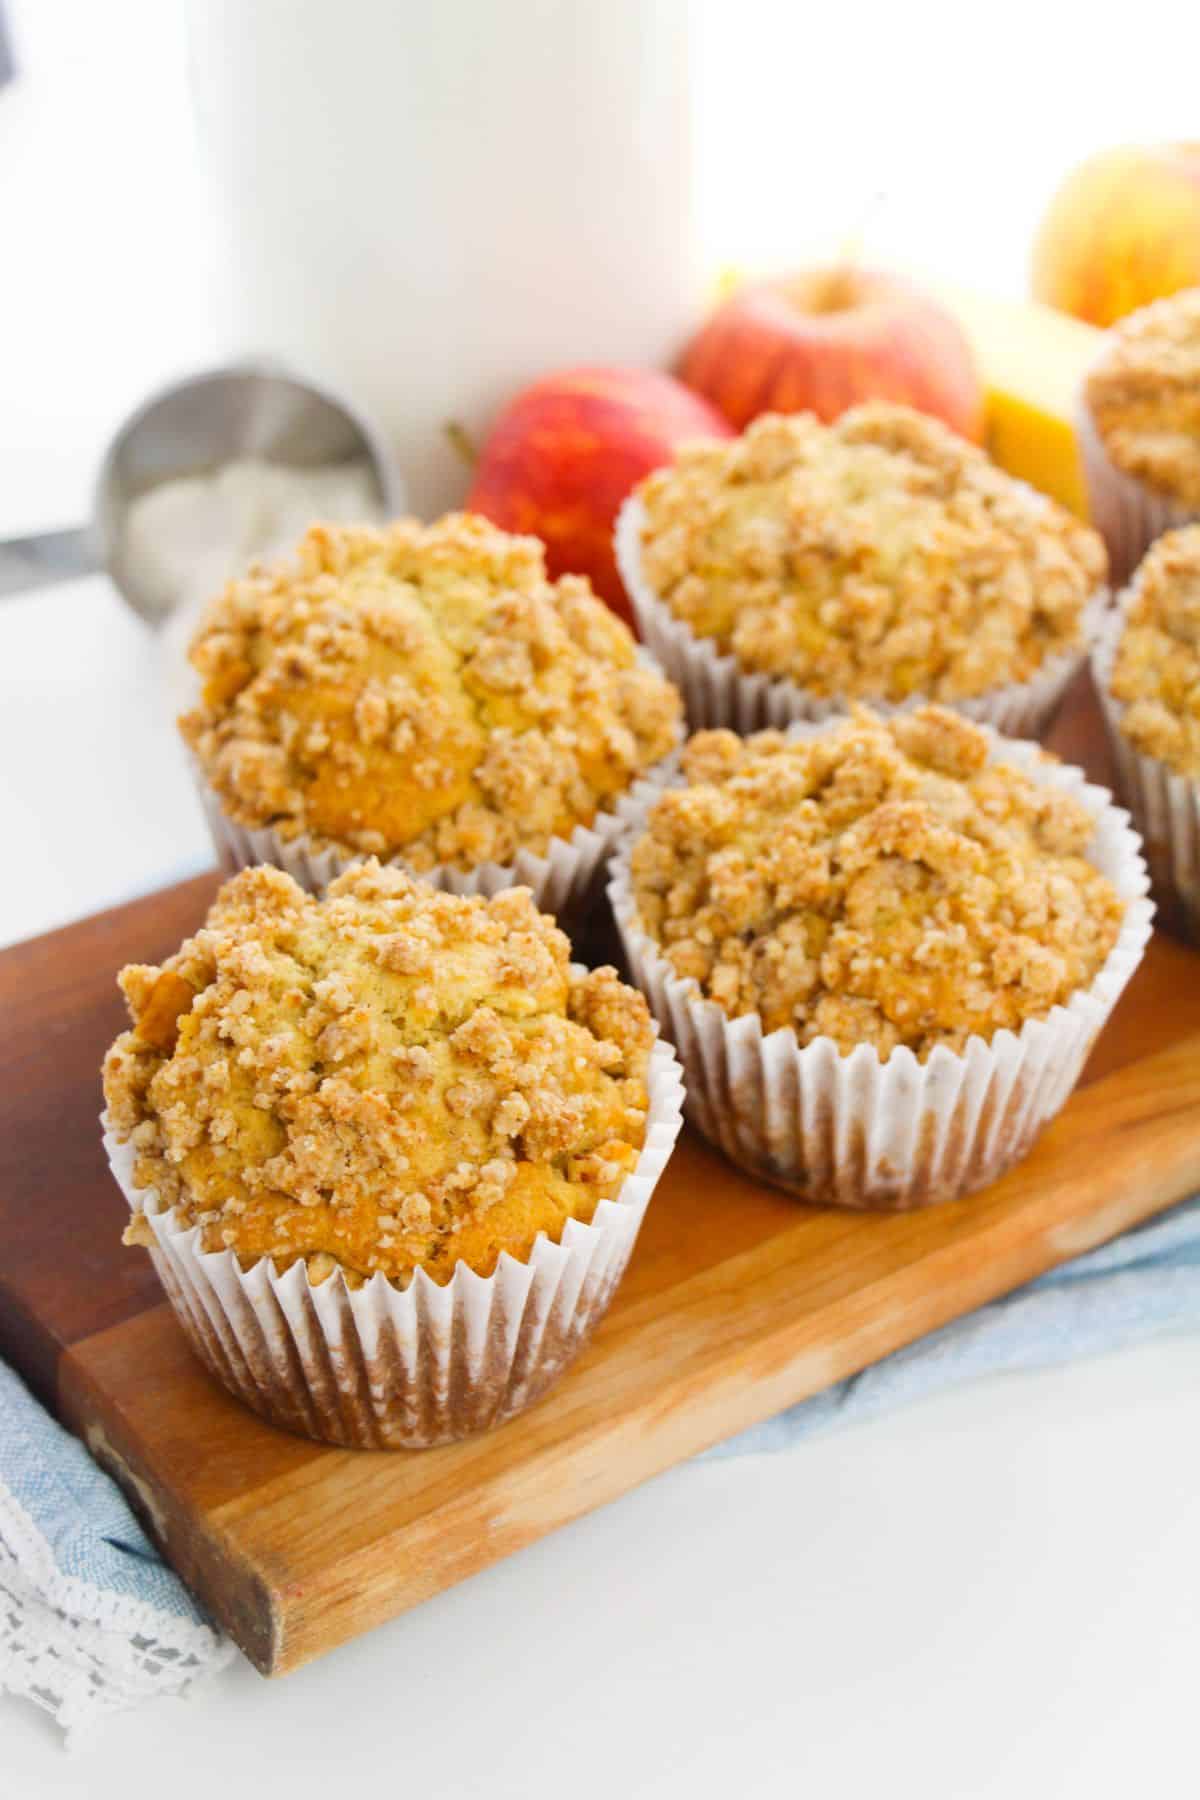 Apple Crumble Muffins on a wooden board.